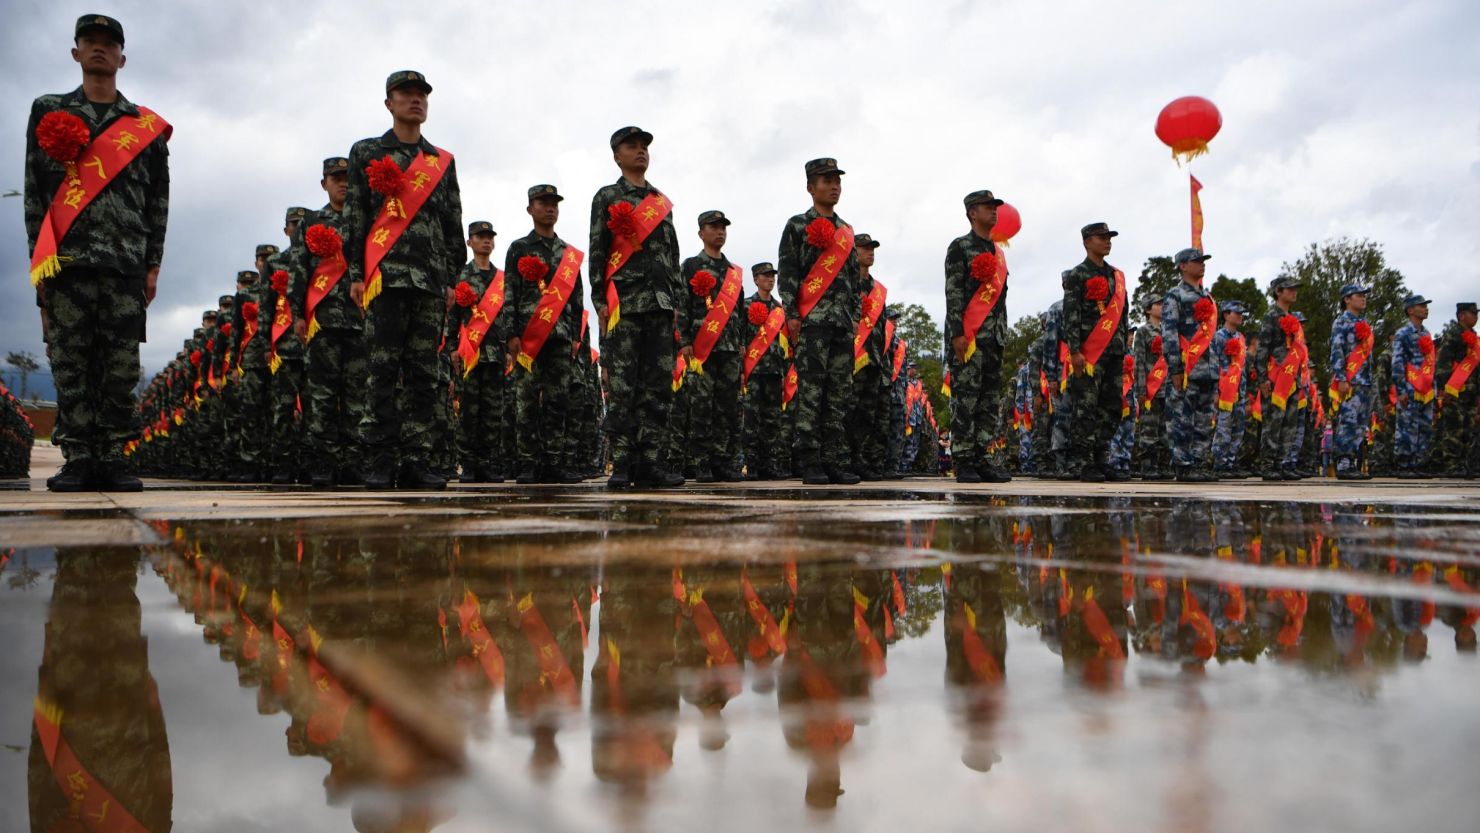 KUNMING, CHINA - SEPTEMBER 15: More than 500 new recruits of the People's Liberation Army (PLA) take part in a farewell ceremony at a militia training base on September 15, 2020 in Kunming, Yunnan Province of China. (Photo by Liu Ranyang/China News Service via Getty Images)